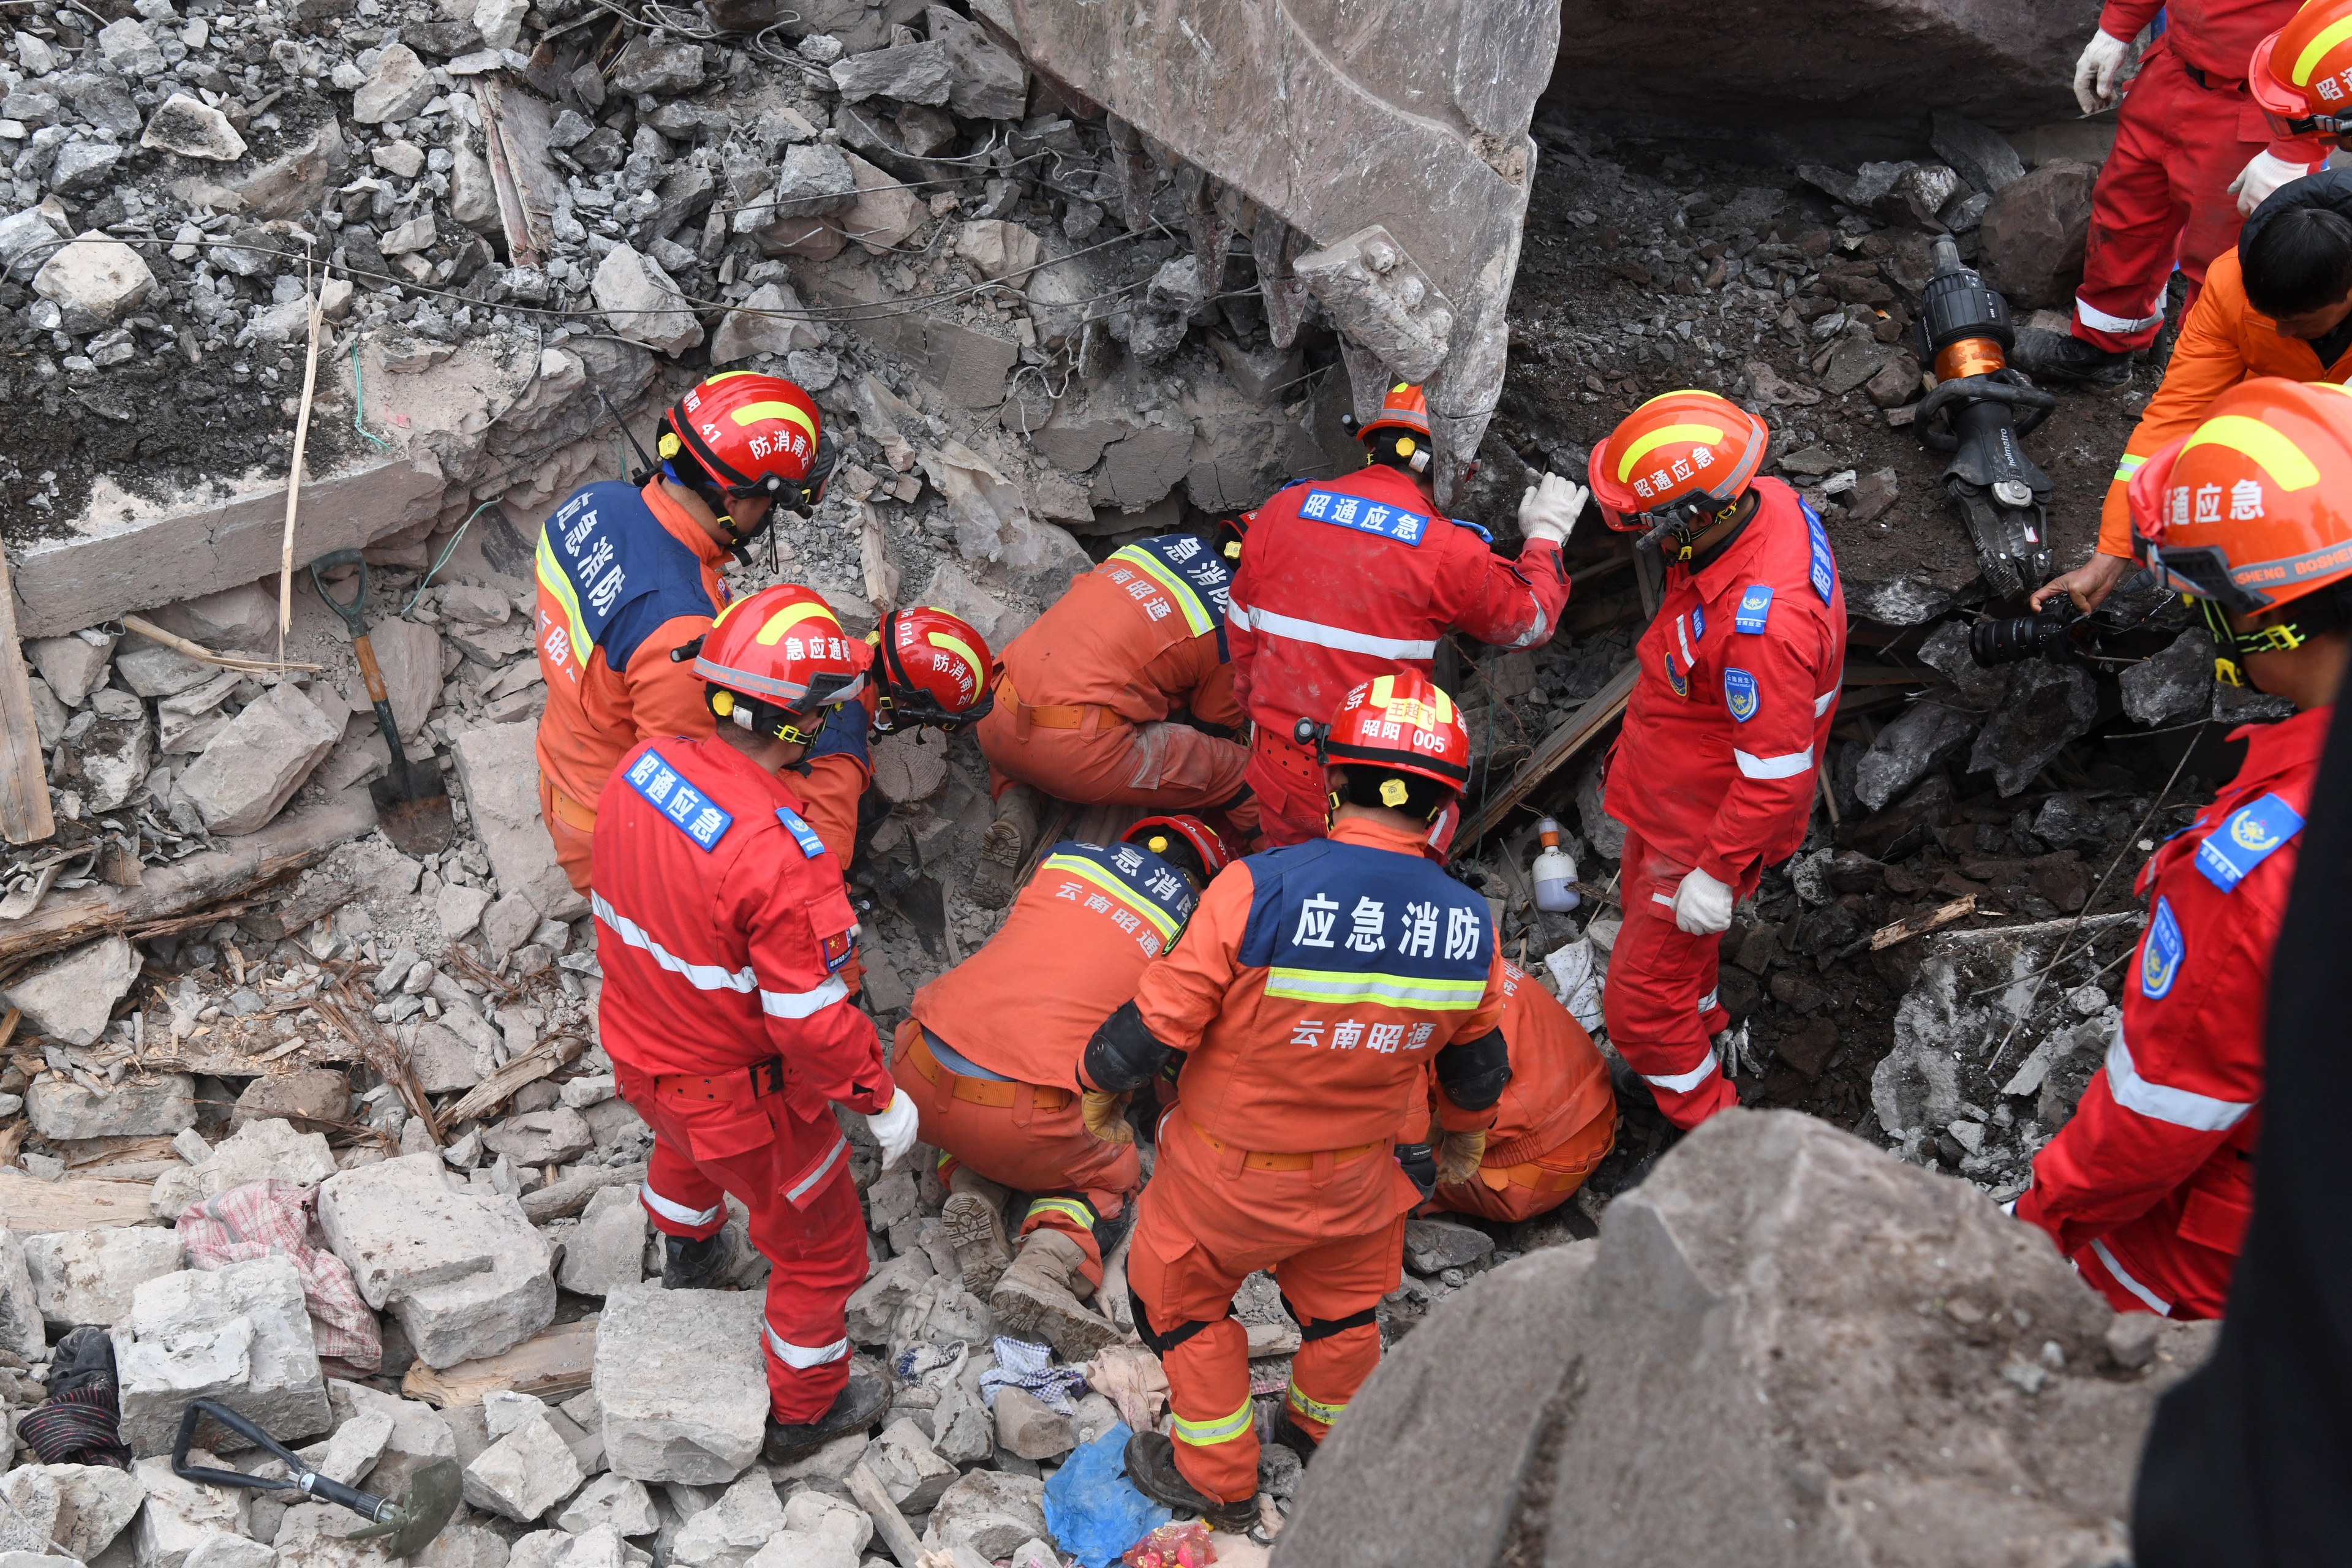 Rescue workers search for survivors in the debris after a landslide hit Zhenxiong County, in Zhaotong, Yunnan province, China January 22, 2024. China Daily via REUTERS